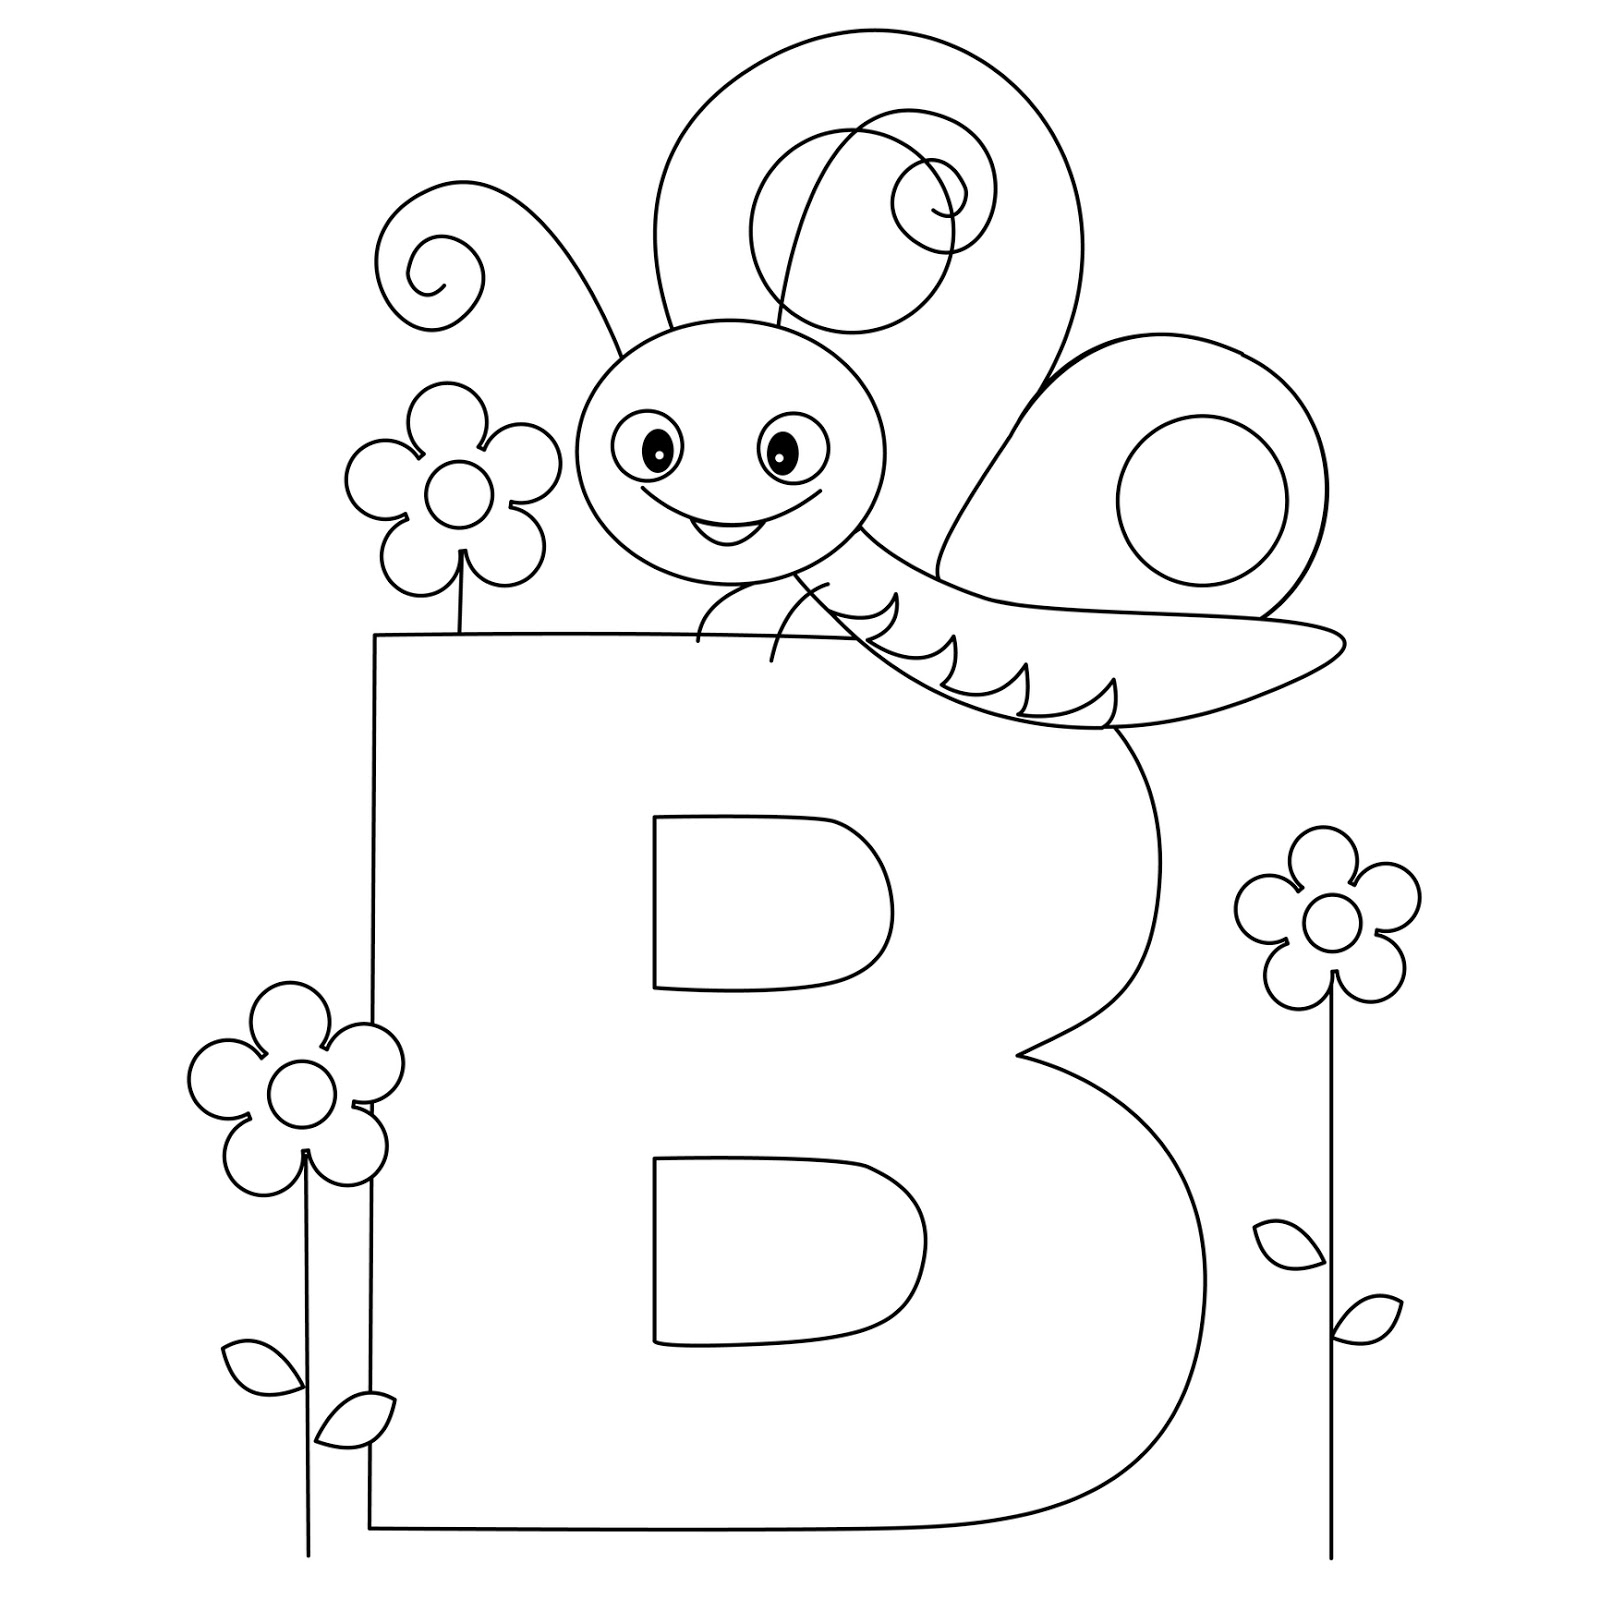 Animal Alphabet Letter B Coloring Page Image